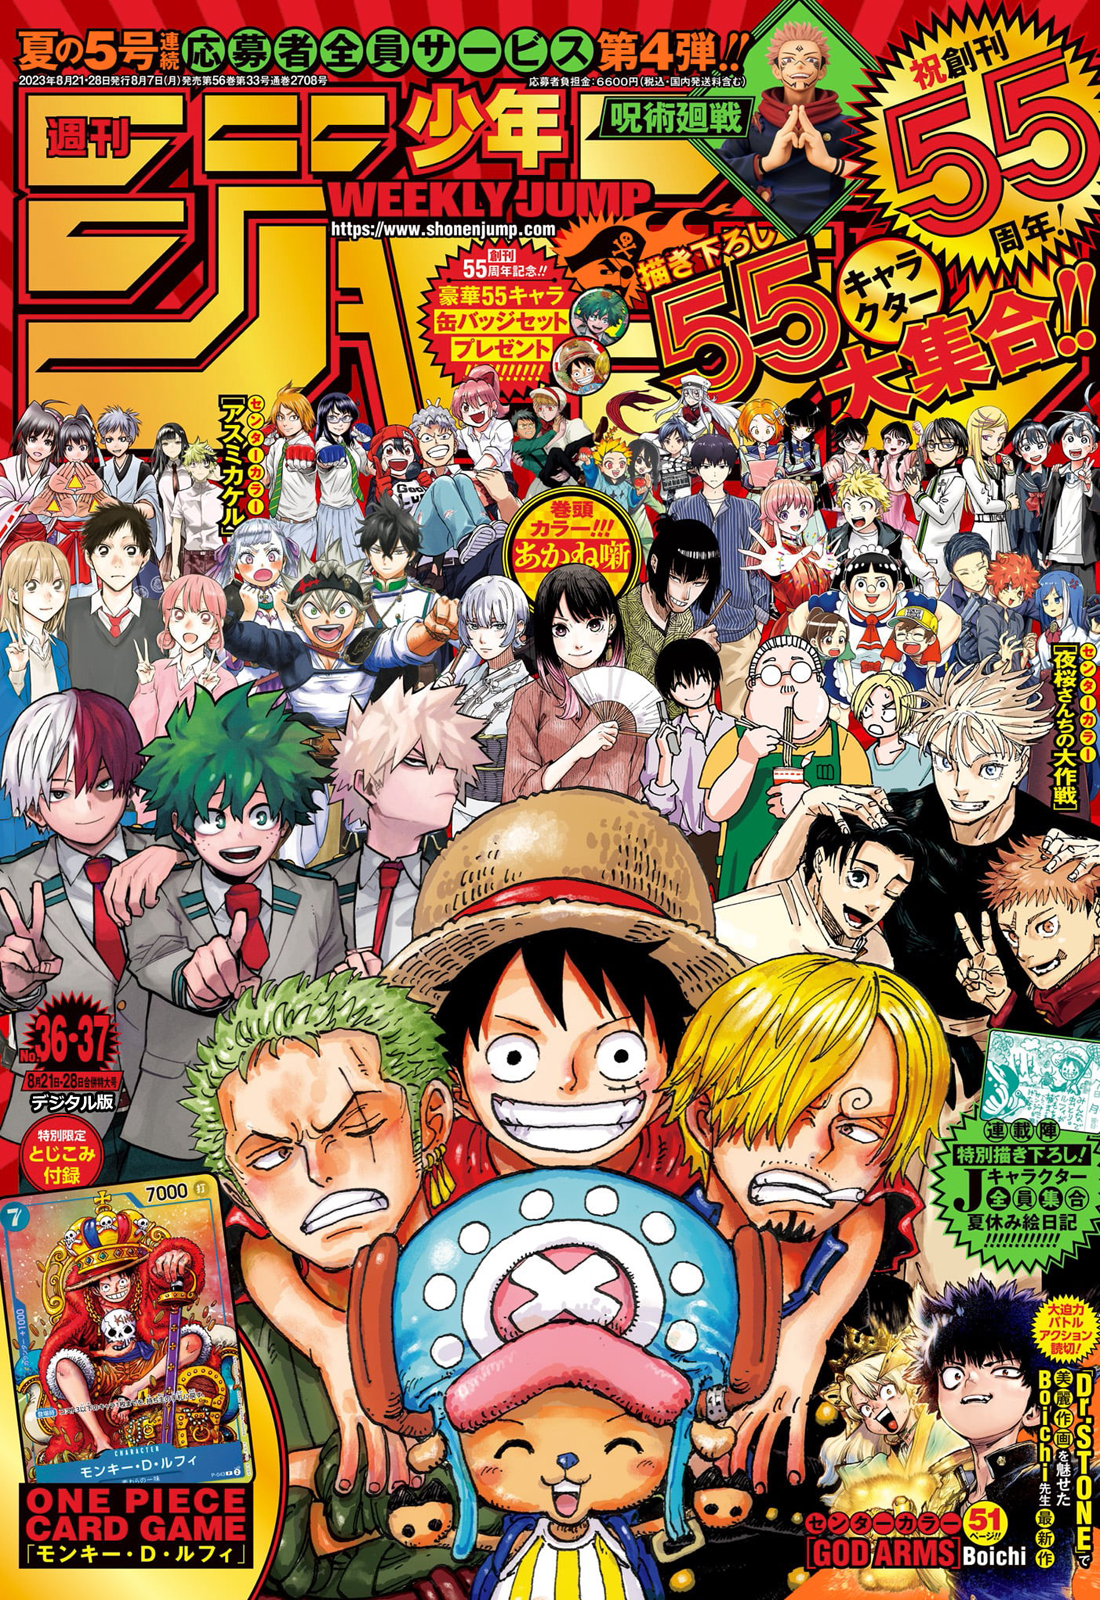 One Piece, Chapter 1089 | TcbScans Org - Free Manga Online in High 